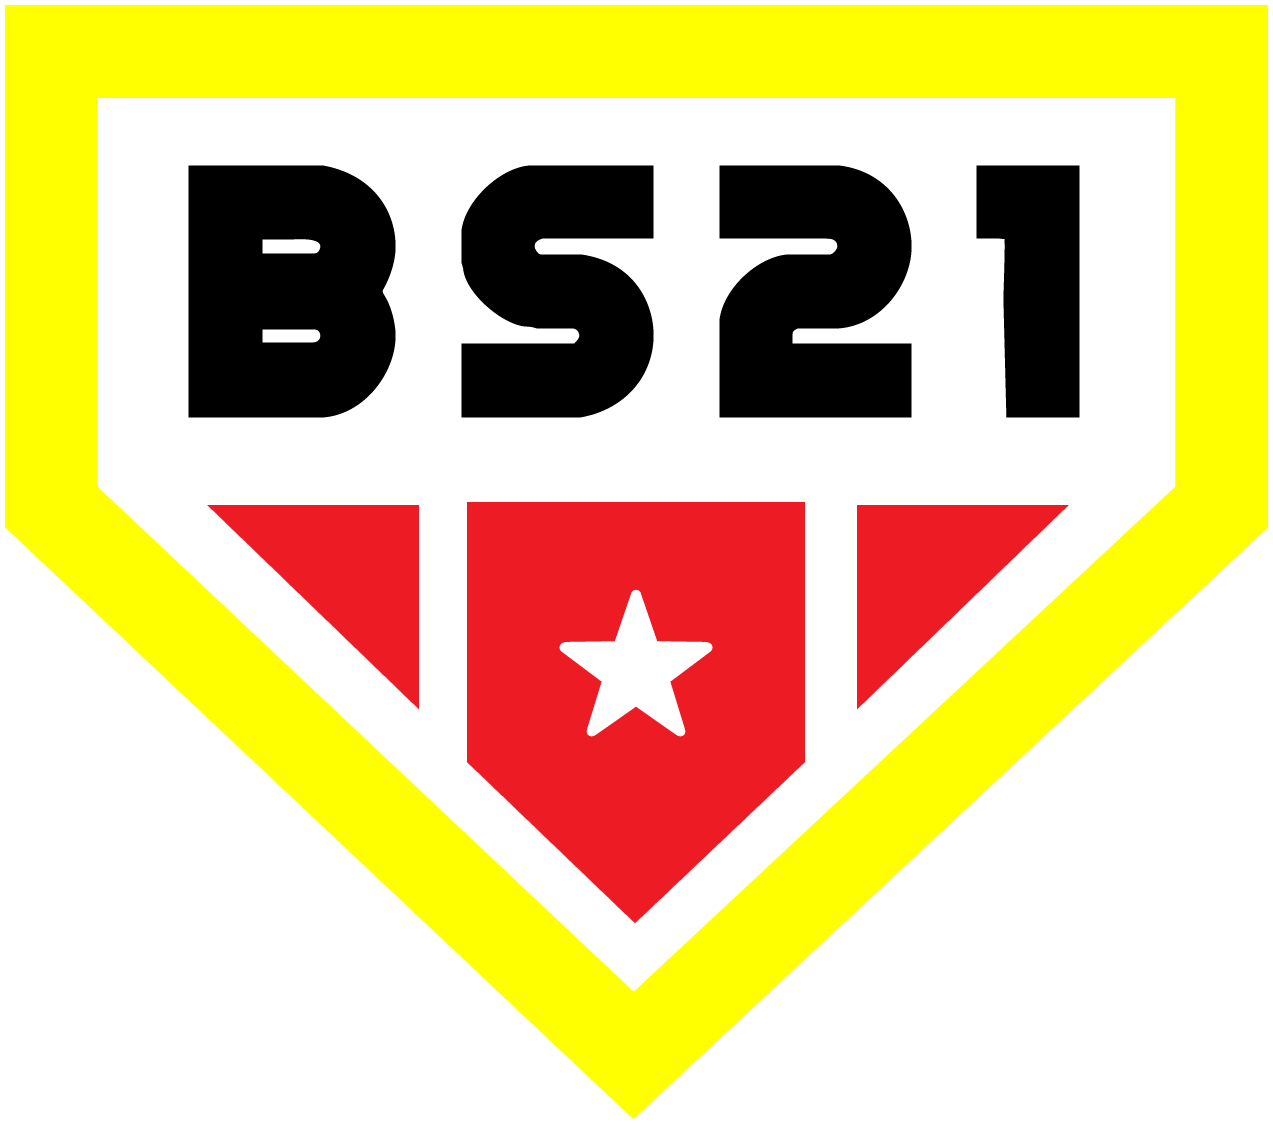 bs21